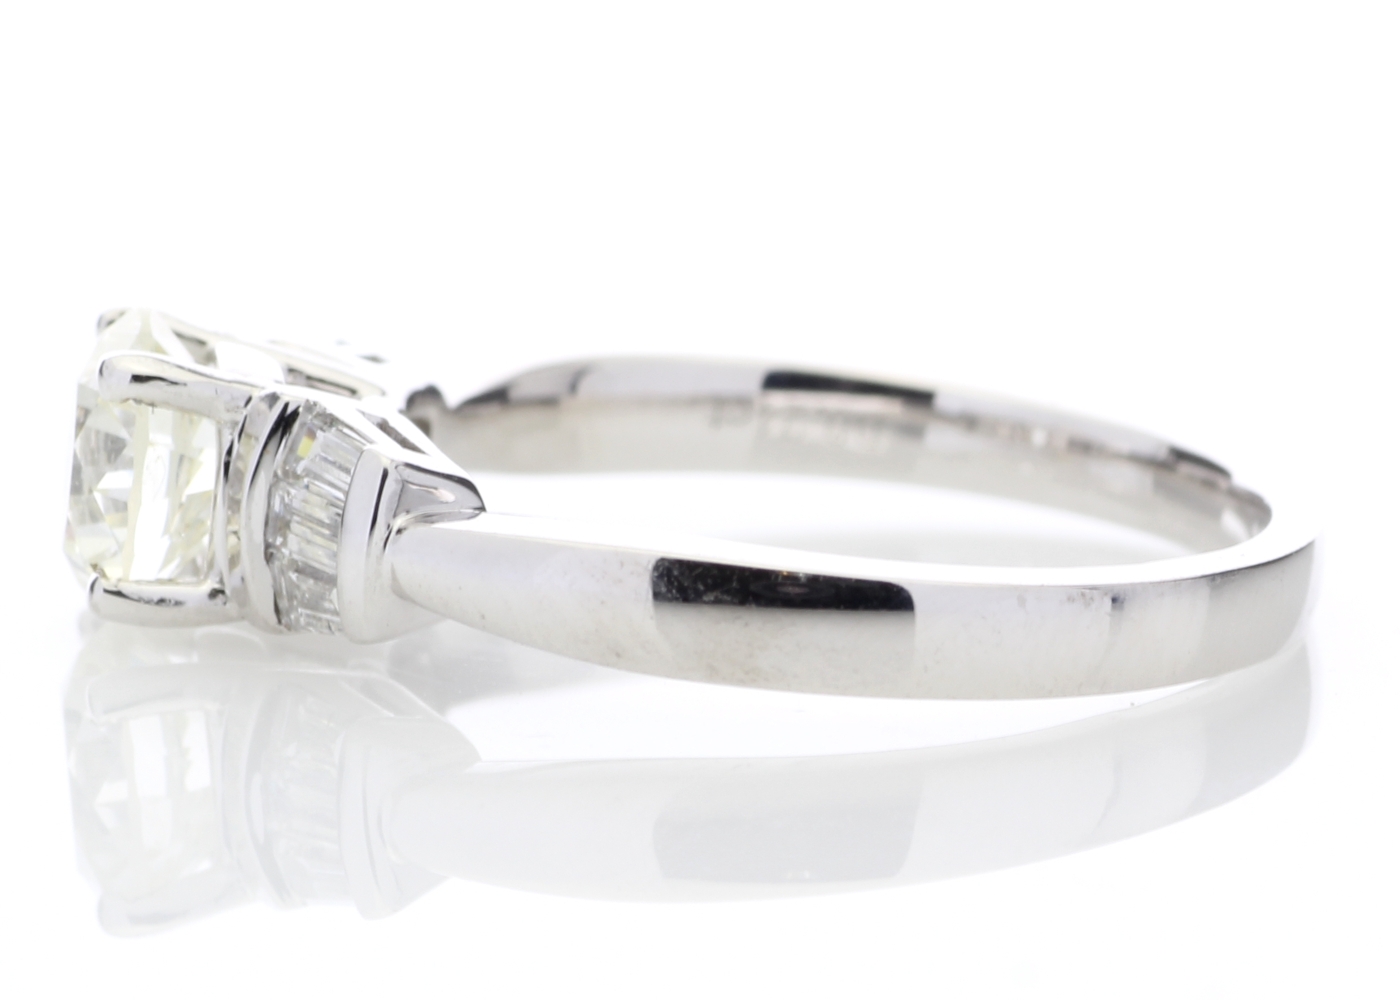 18ctWhite Gold Single Stone With Baguette Set Shoulders Diamond Ring (1.03) 1.26 Carats - Image 3 of 4